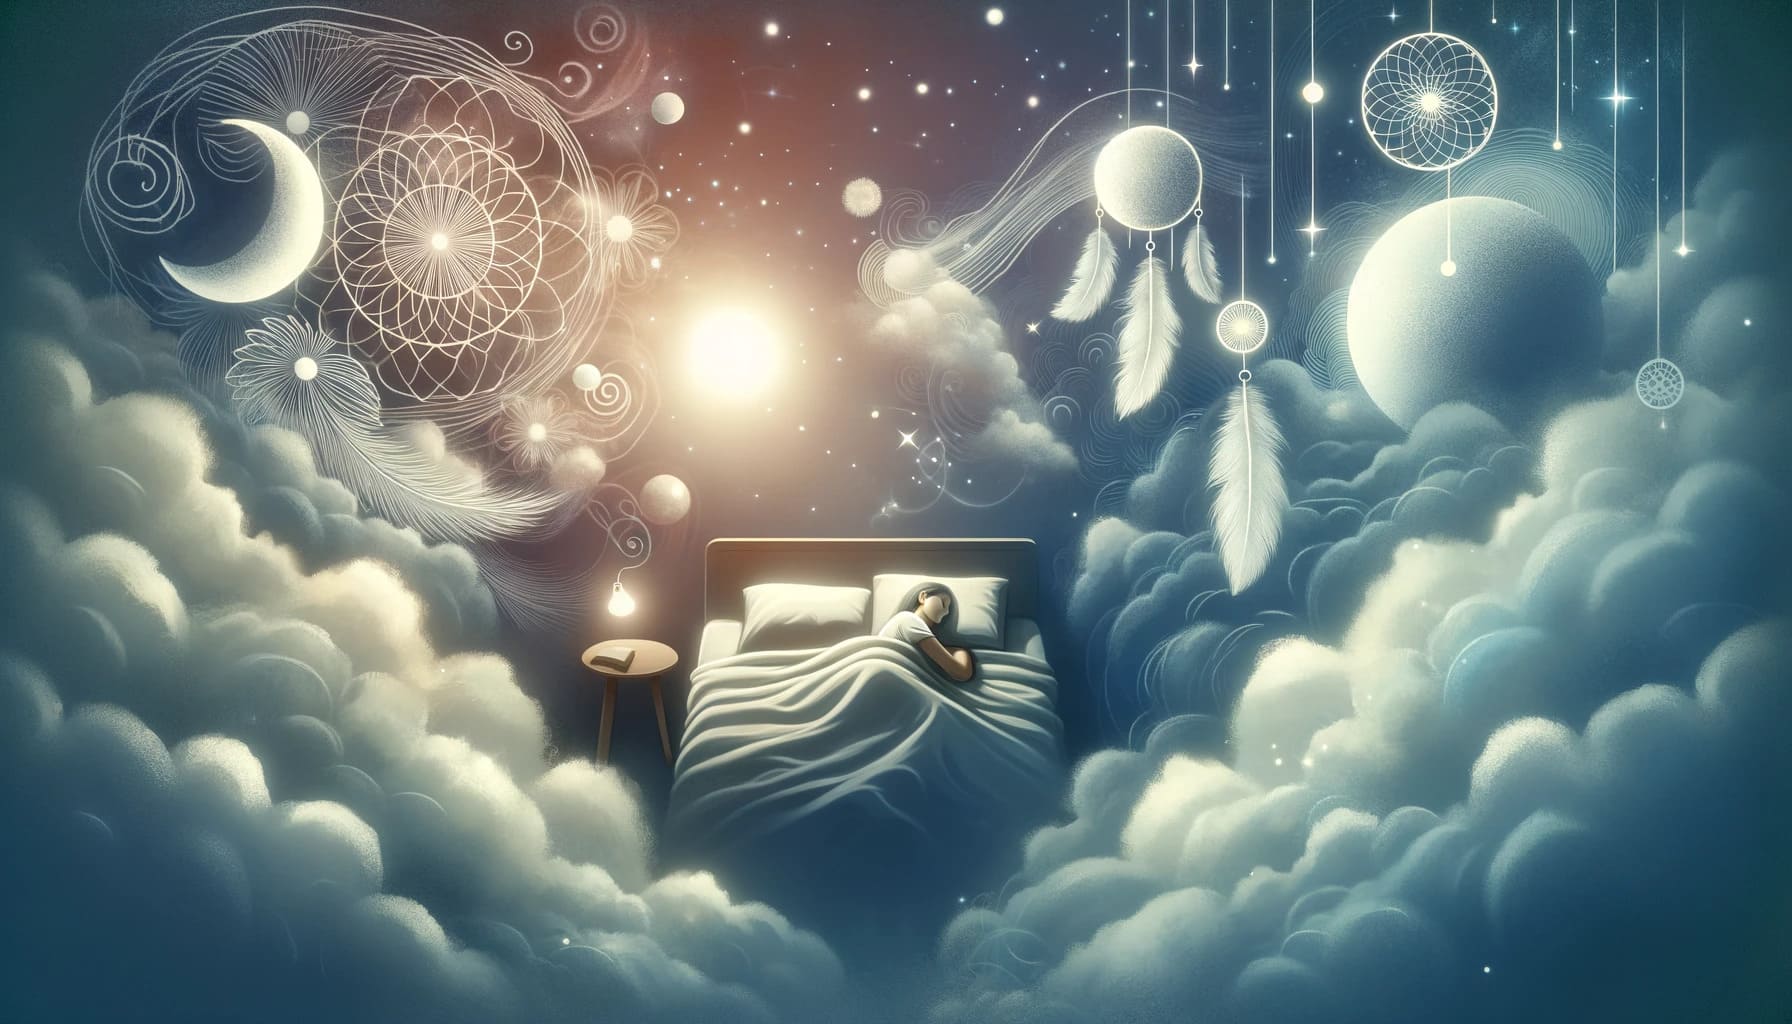 dreamlike illustration showing a person peacefully sleeping in a bed surrounded by ethereal imagery like floating dream catchers soft clouds and